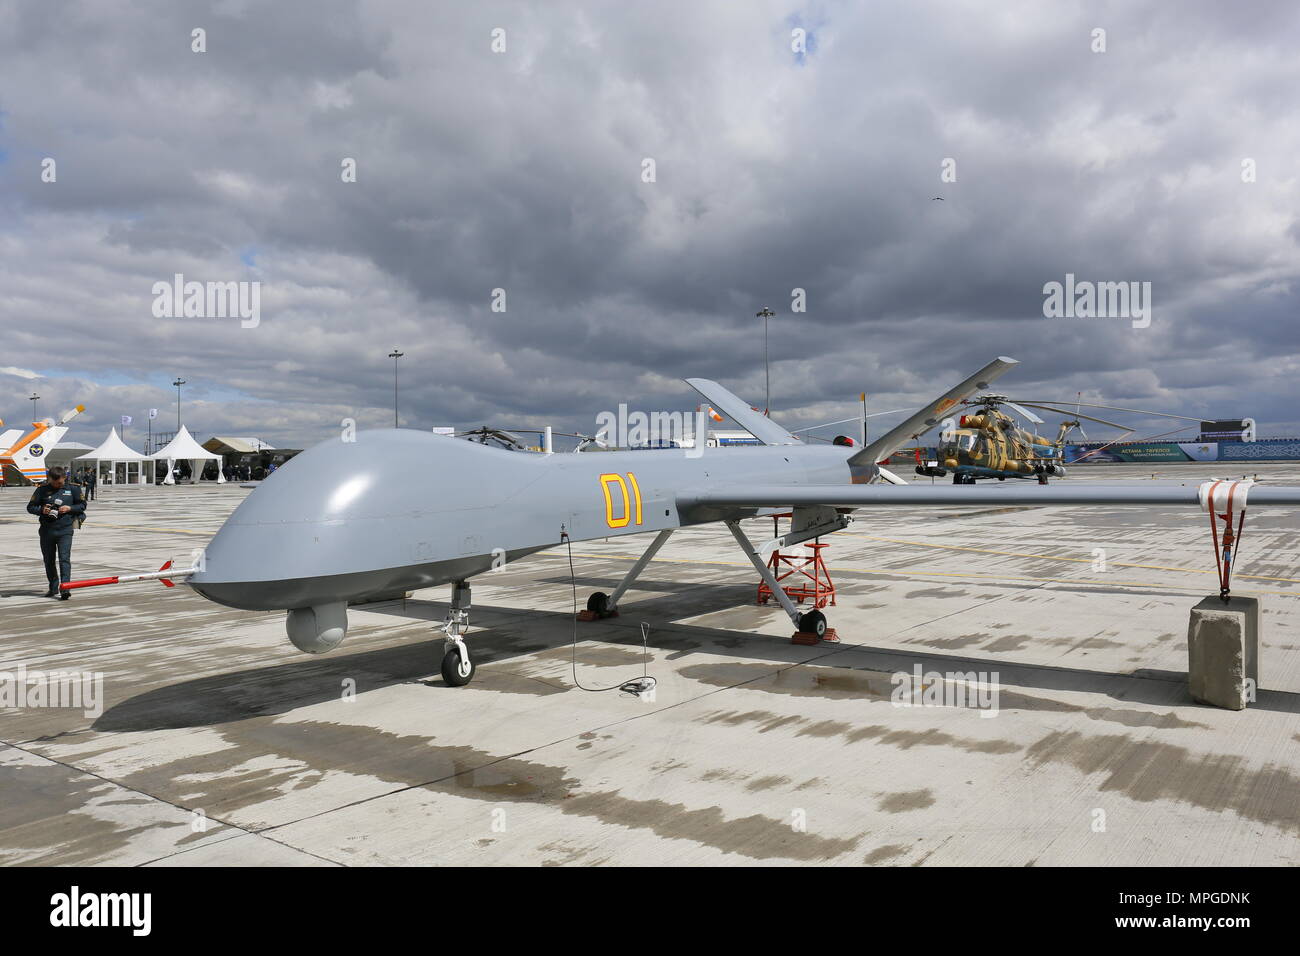 Astana, Kazakhstan. 23rd May, 2018. A Chinese-made military drone is displayed at the Kazakhstan Defense Exhibition in Astana, capital of Kazakhstan, May 23, 2018. Seven Chinese military trade companies took their best products to participate in the exhibition held in Kazakhstan from May 23 to 26. Credit: Aibek Abilov/Xinhua/Alamy Live News Stock Photo